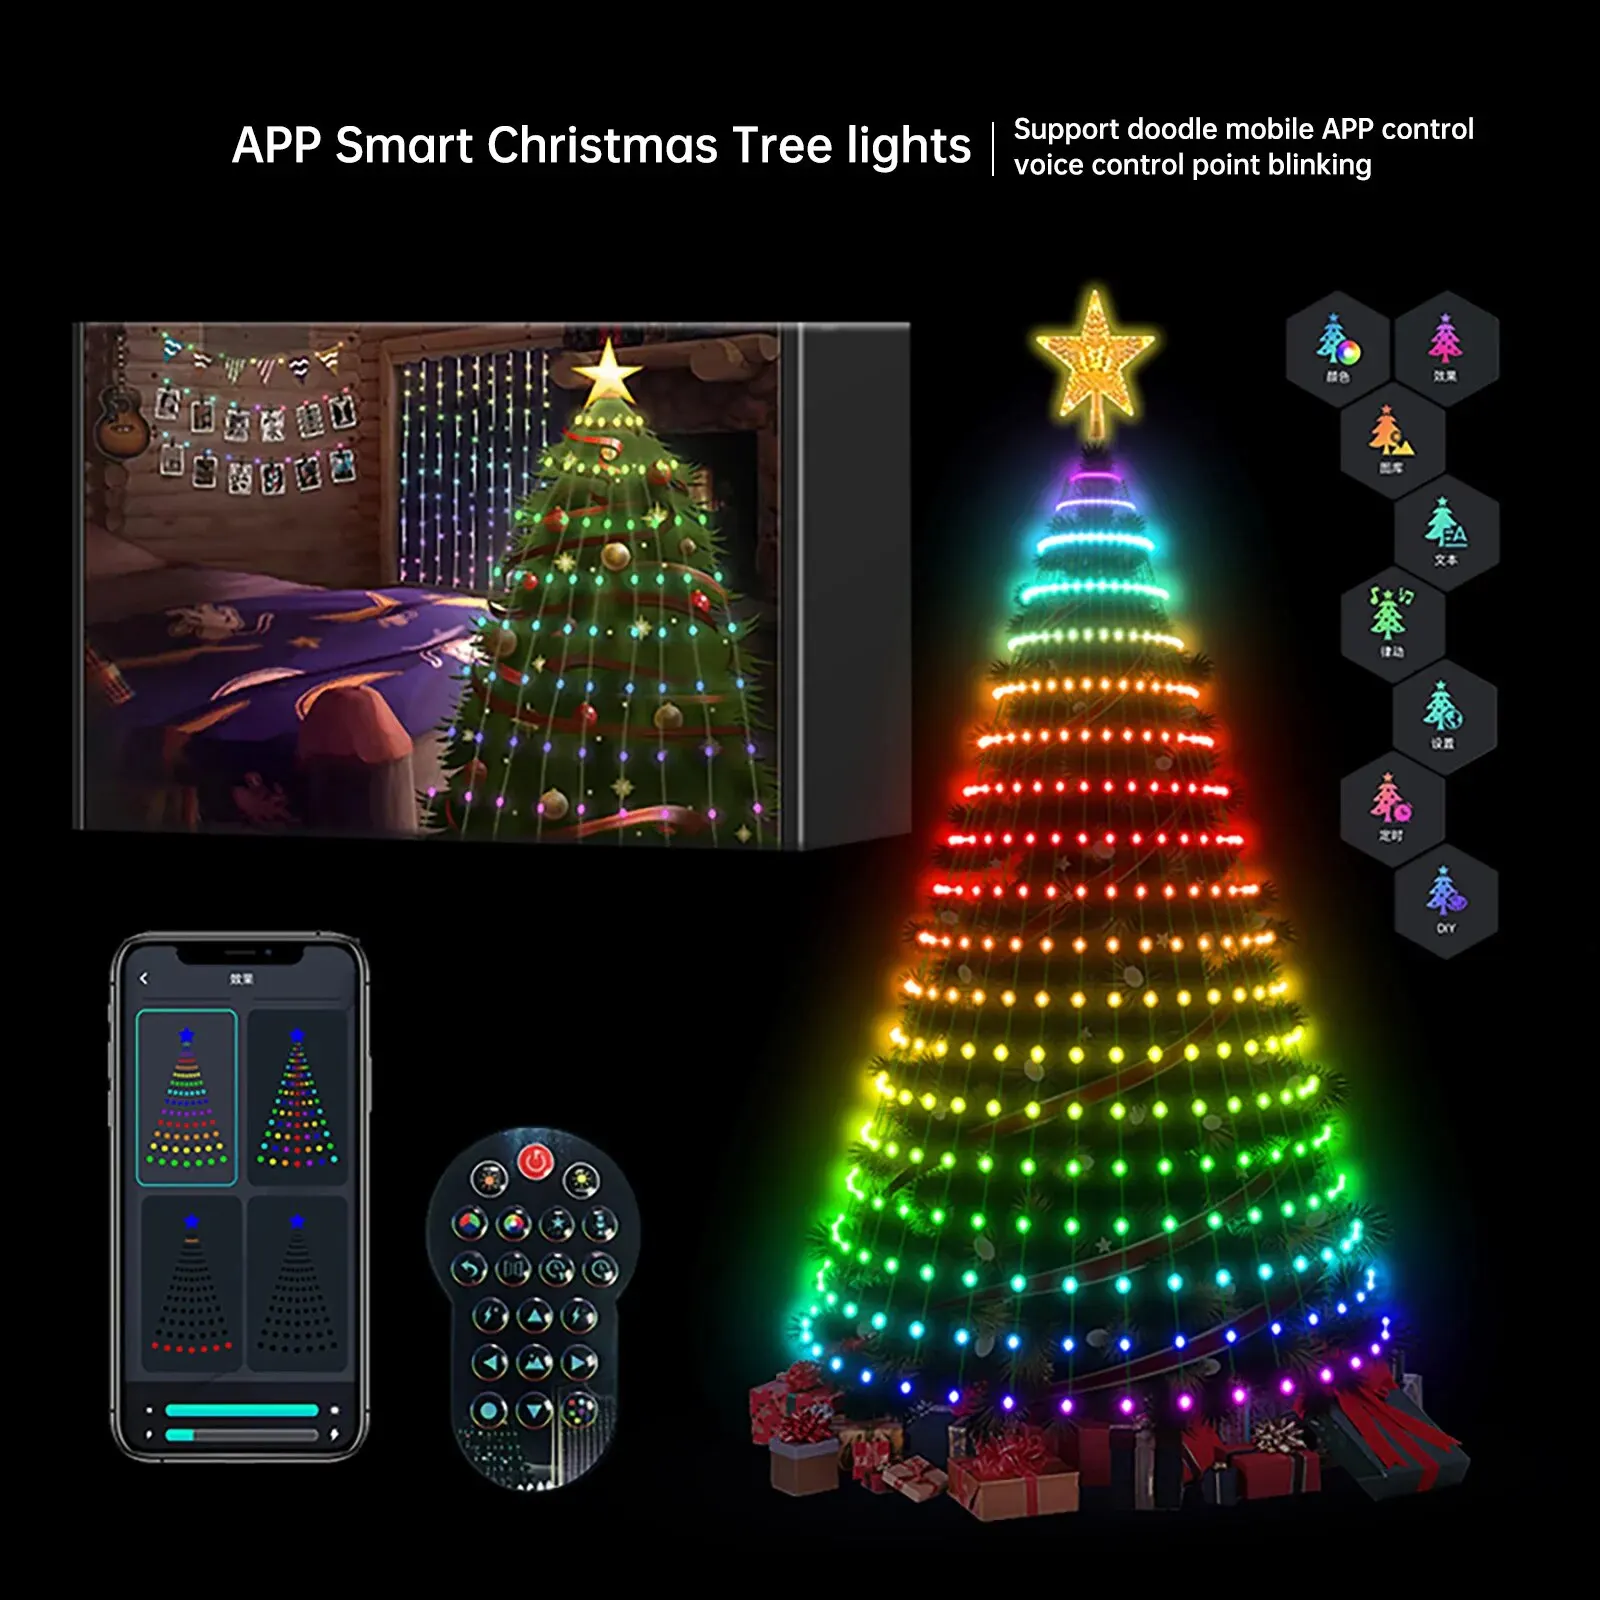 https://ae01.alicdn.com/kf/Sf3b06f4fced64d02930c36c0b059bcbbu/400LED-Smart-Christmas-Tree-Lights-APP-Control-DIY-Text-Picture-RGB-String-Lights-with-Remote-Control.jpg